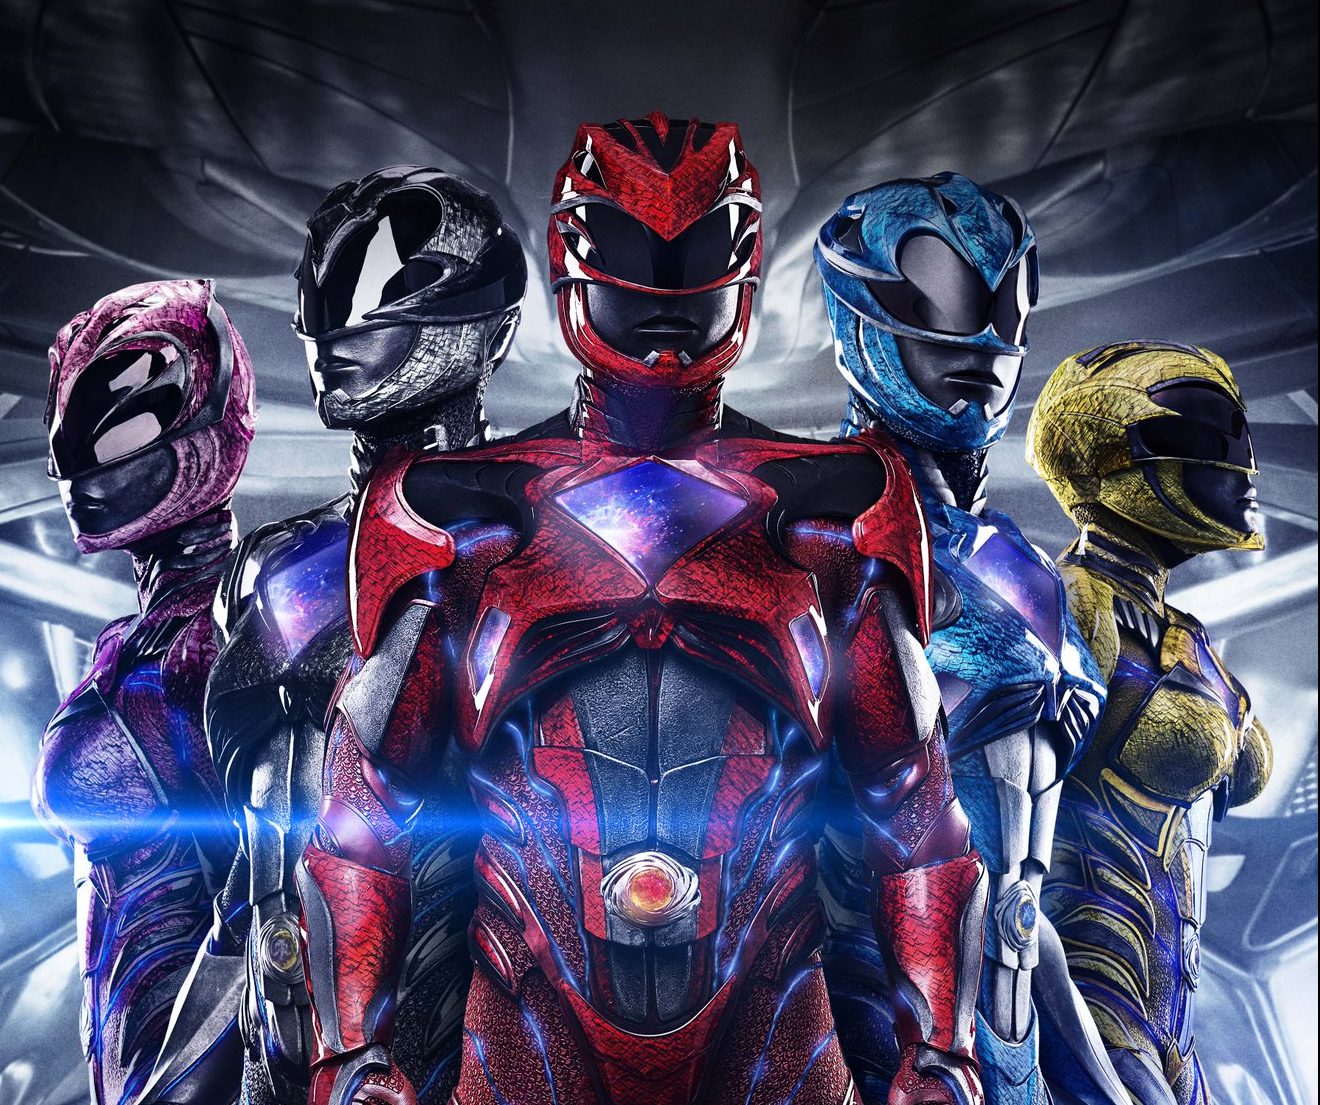 PHOTO: Poster for Saban's Power Rangers movie. Photo courtesy of Lionsgate Entertainment Company.